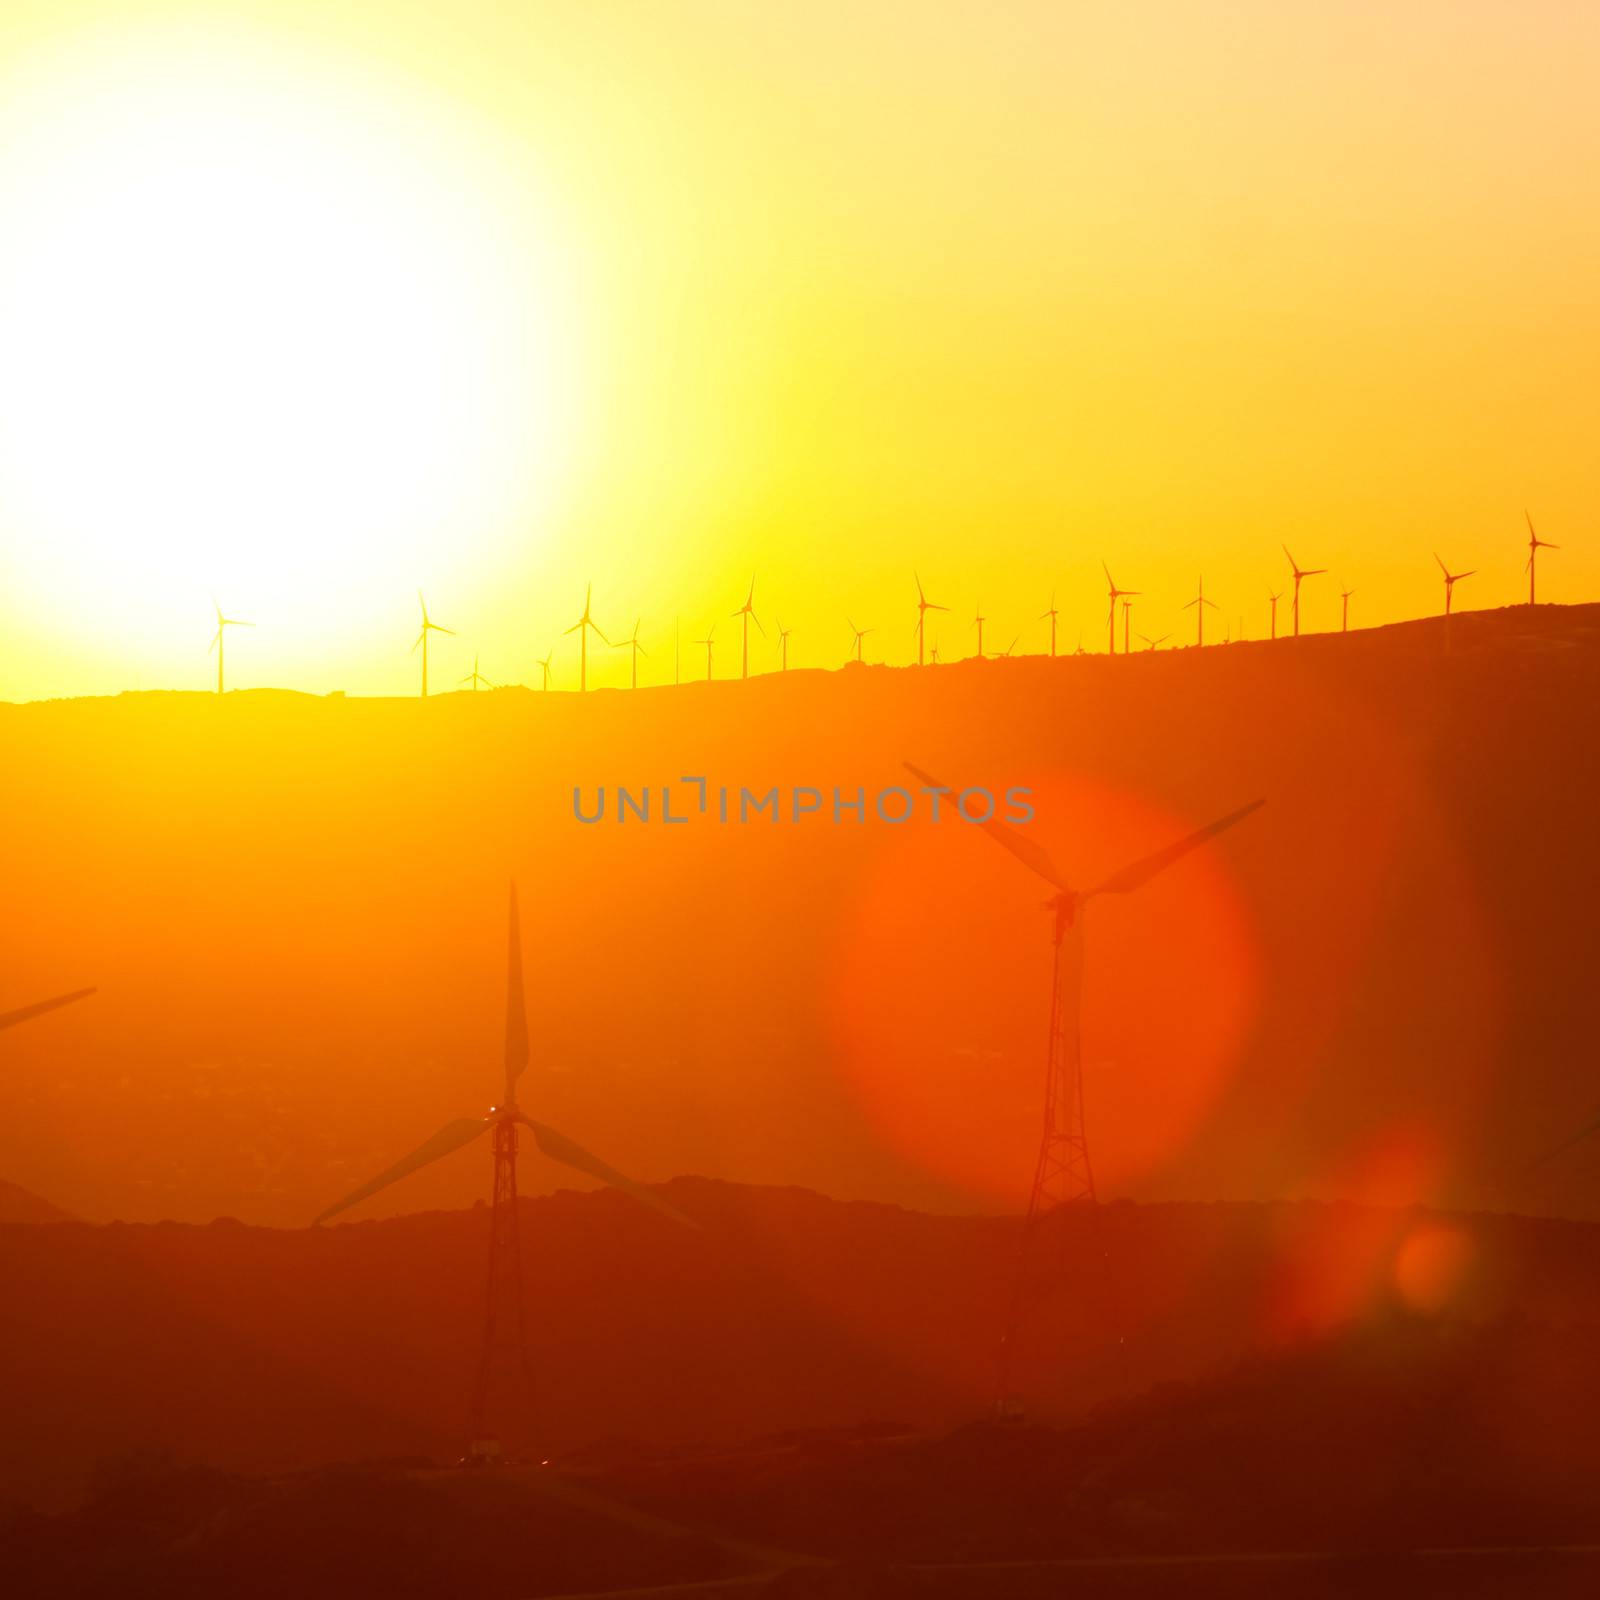 Wind turbines farm at sunset in southern Spain.